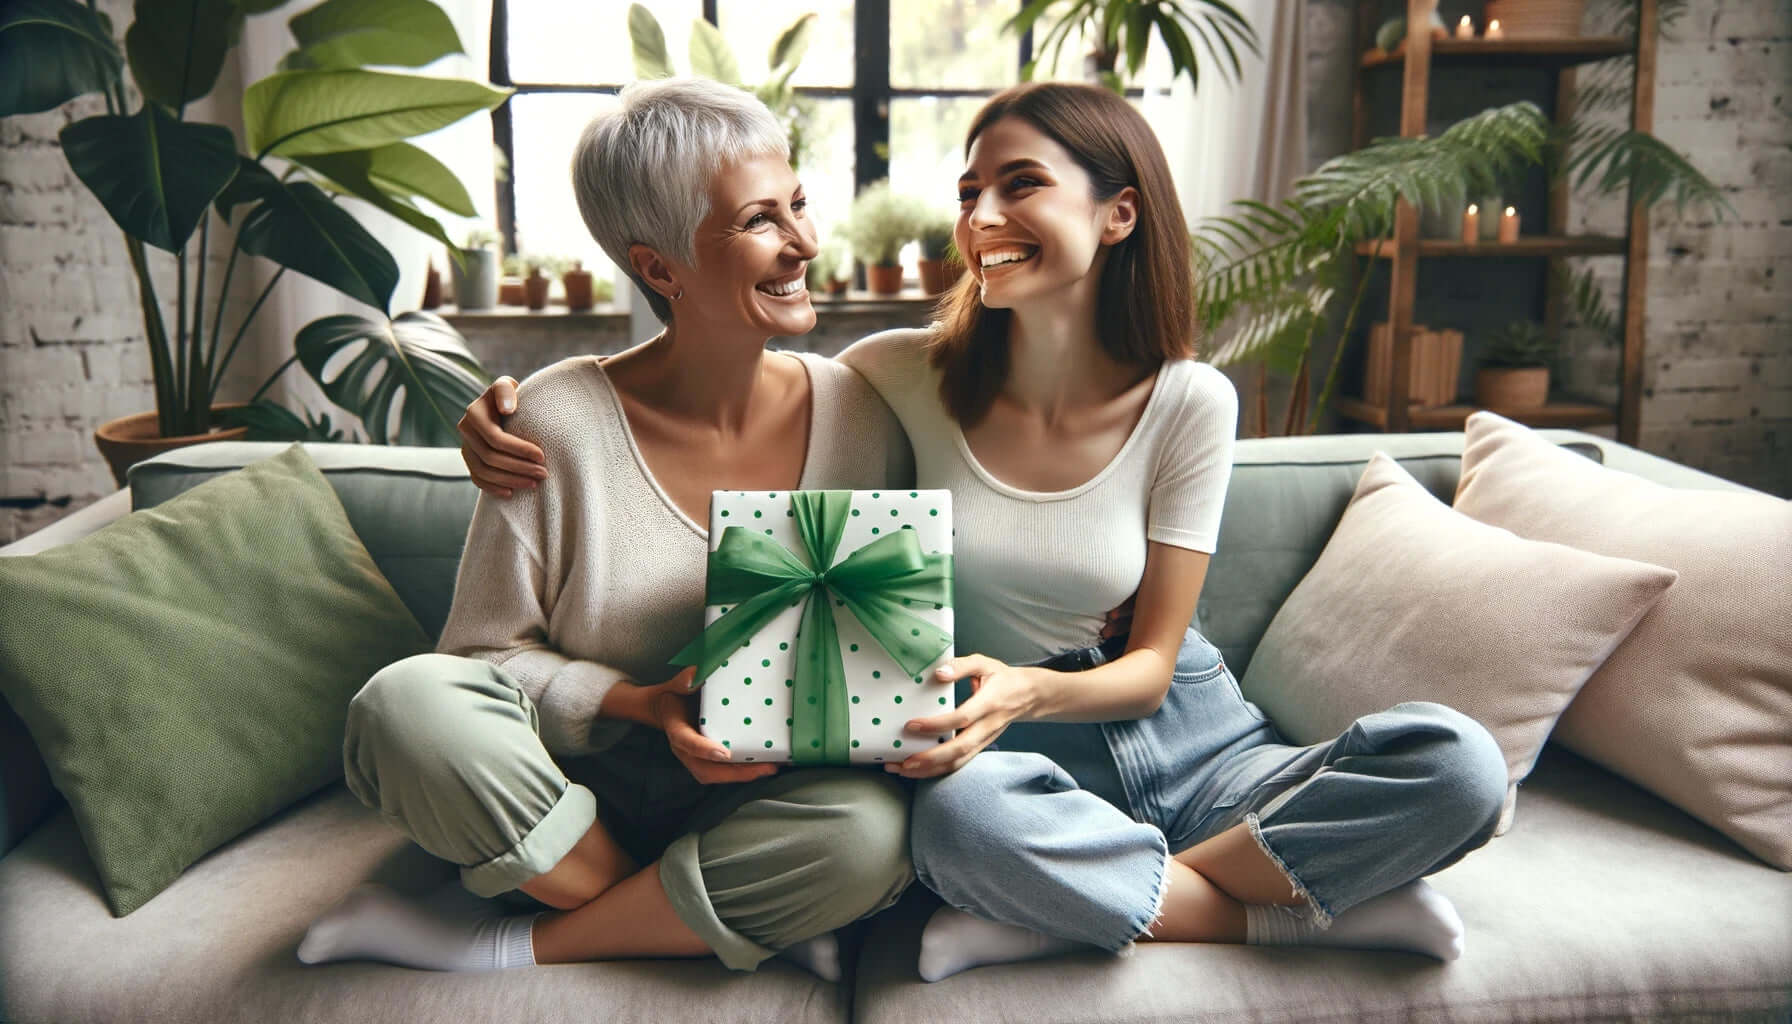 Mother and adult daughter sharing laughter and joy as they hold a small, polka-dotted gift in a plant-filled living room, symbolizing a heartfelt Mother's Day celebration.